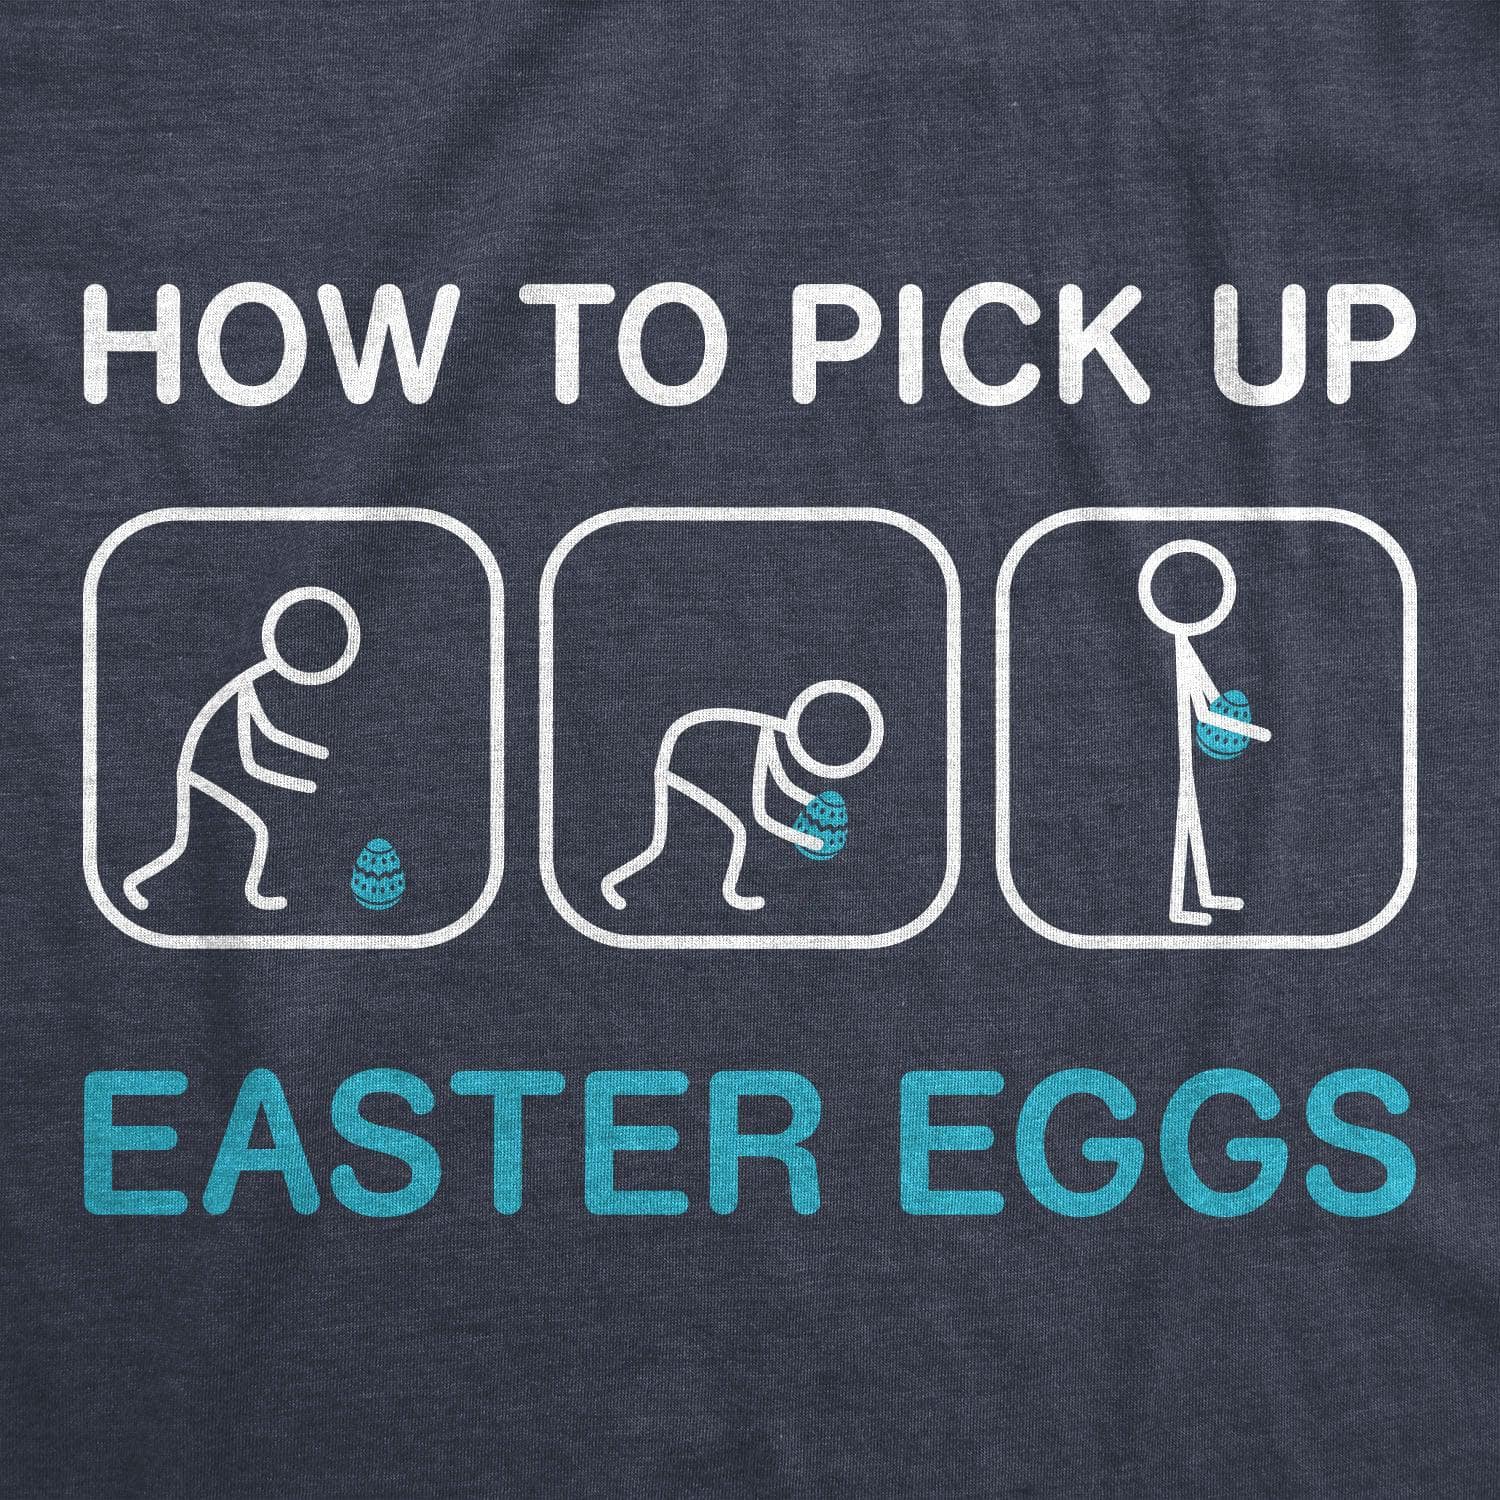 How To Pick Up Easter Eggs Men's Tshirt  -  Crazy Dog T-Shirts